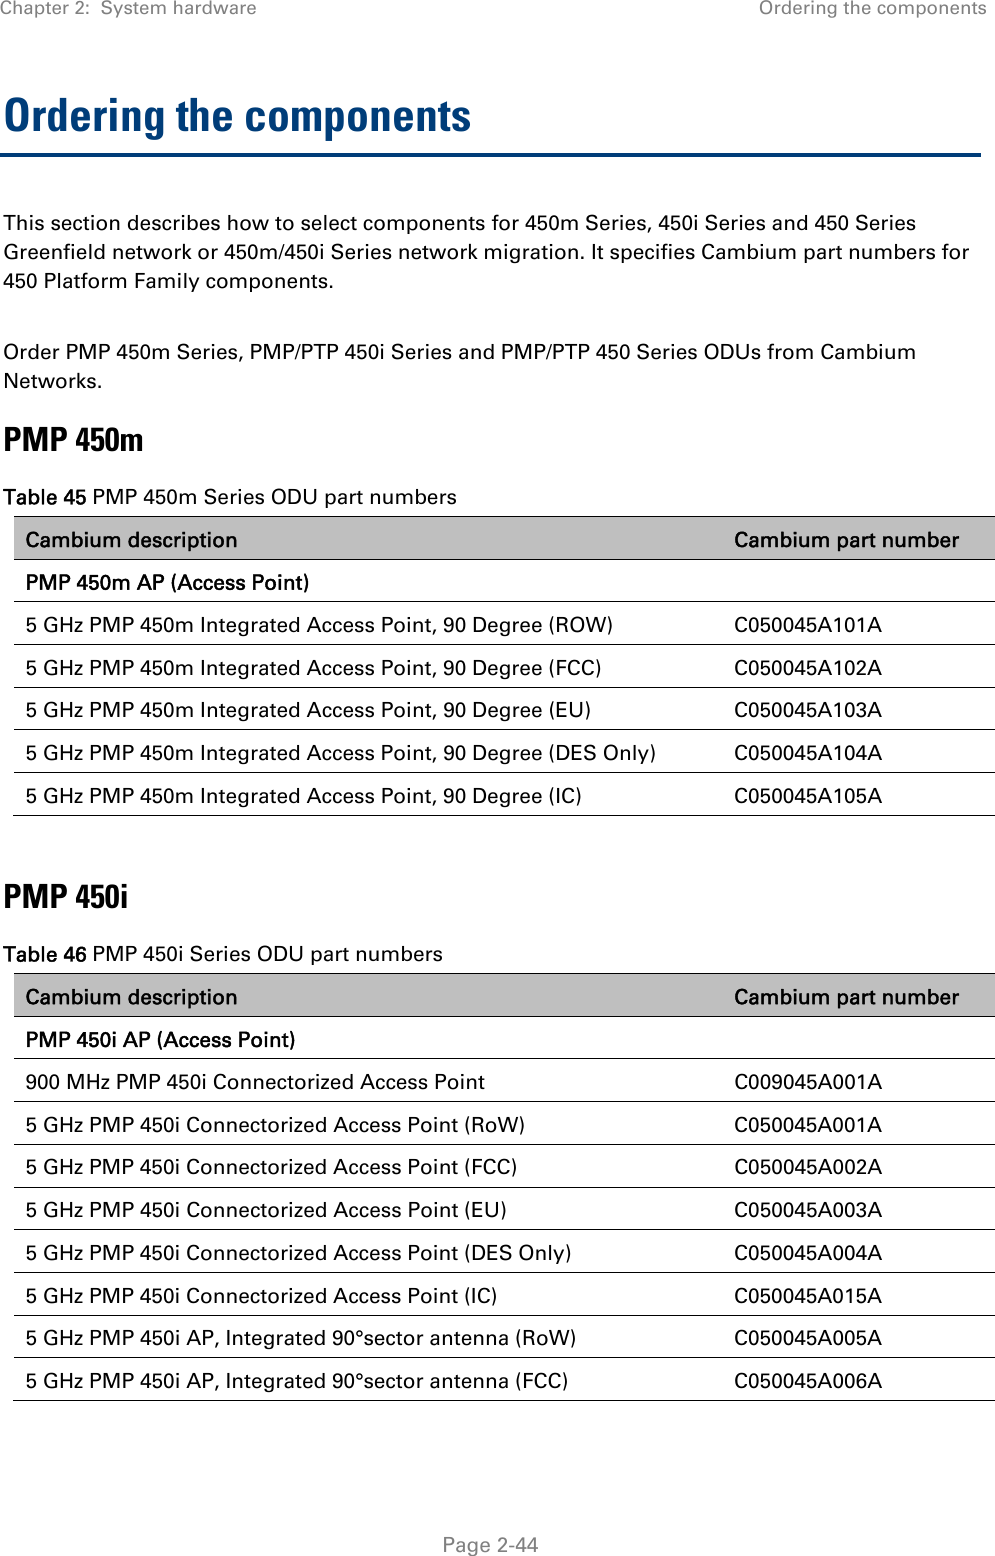 Chapter 2:  System hardware  Ordering the components   Page 2-44 Ordering the components This section describes how to select components for 450m Series, 450i Series and 450 Series Greenfield network or 450m/450i Series network migration. It specifies Cambium part numbers for 450 Platform Family components.  Order PMP 450m Series, PMP/PTP 450i Series and PMP/PTP 450 Series ODUs from Cambium Networks.  PMP 450m Table 45 PMP 450m Series ODU part numbers Cambium description  Cambium part number PMP 450m AP (Access Point)    5 GHz PMP 450m Integrated Access Point, 90 Degree (ROW)  C050045A101A 5 GHz PMP 450m Integrated Access Point, 90 Degree (FCC)  C050045A102A 5 GHz PMP 450m Integrated Access Point, 90 Degree (EU)  C050045A103A 5 GHz PMP 450m Integrated Access Point, 90 Degree (DES Only)  C050045A104A 5 GHz PMP 450m Integrated Access Point, 90 Degree (IC)  C050045A105A  PMP 450i Table 46 PMP 450i Series ODU part numbers Cambium description  Cambium part number PMP 450i AP (Access Point)    900 MHz PMP 450i Connectorized Access Point  C009045A001A 5 GHz PMP 450i Connectorized Access Point (RoW)  C050045A001A 5 GHz PMP 450i Connectorized Access Point (FCC)  C050045A002A 5 GHz PMP 450i Connectorized Access Point (EU)  C050045A003A 5 GHz PMP 450i Connectorized Access Point (DES Only)  C050045A004A 5 GHz PMP 450i Connectorized Access Point (IC)  C050045A015A 5 GHz PMP 450i AP, Integrated 90°sector antenna (RoW)  C050045A005A 5 GHz PMP 450i AP, Integrated 90°sector antenna (FCC)  C050045A006A 